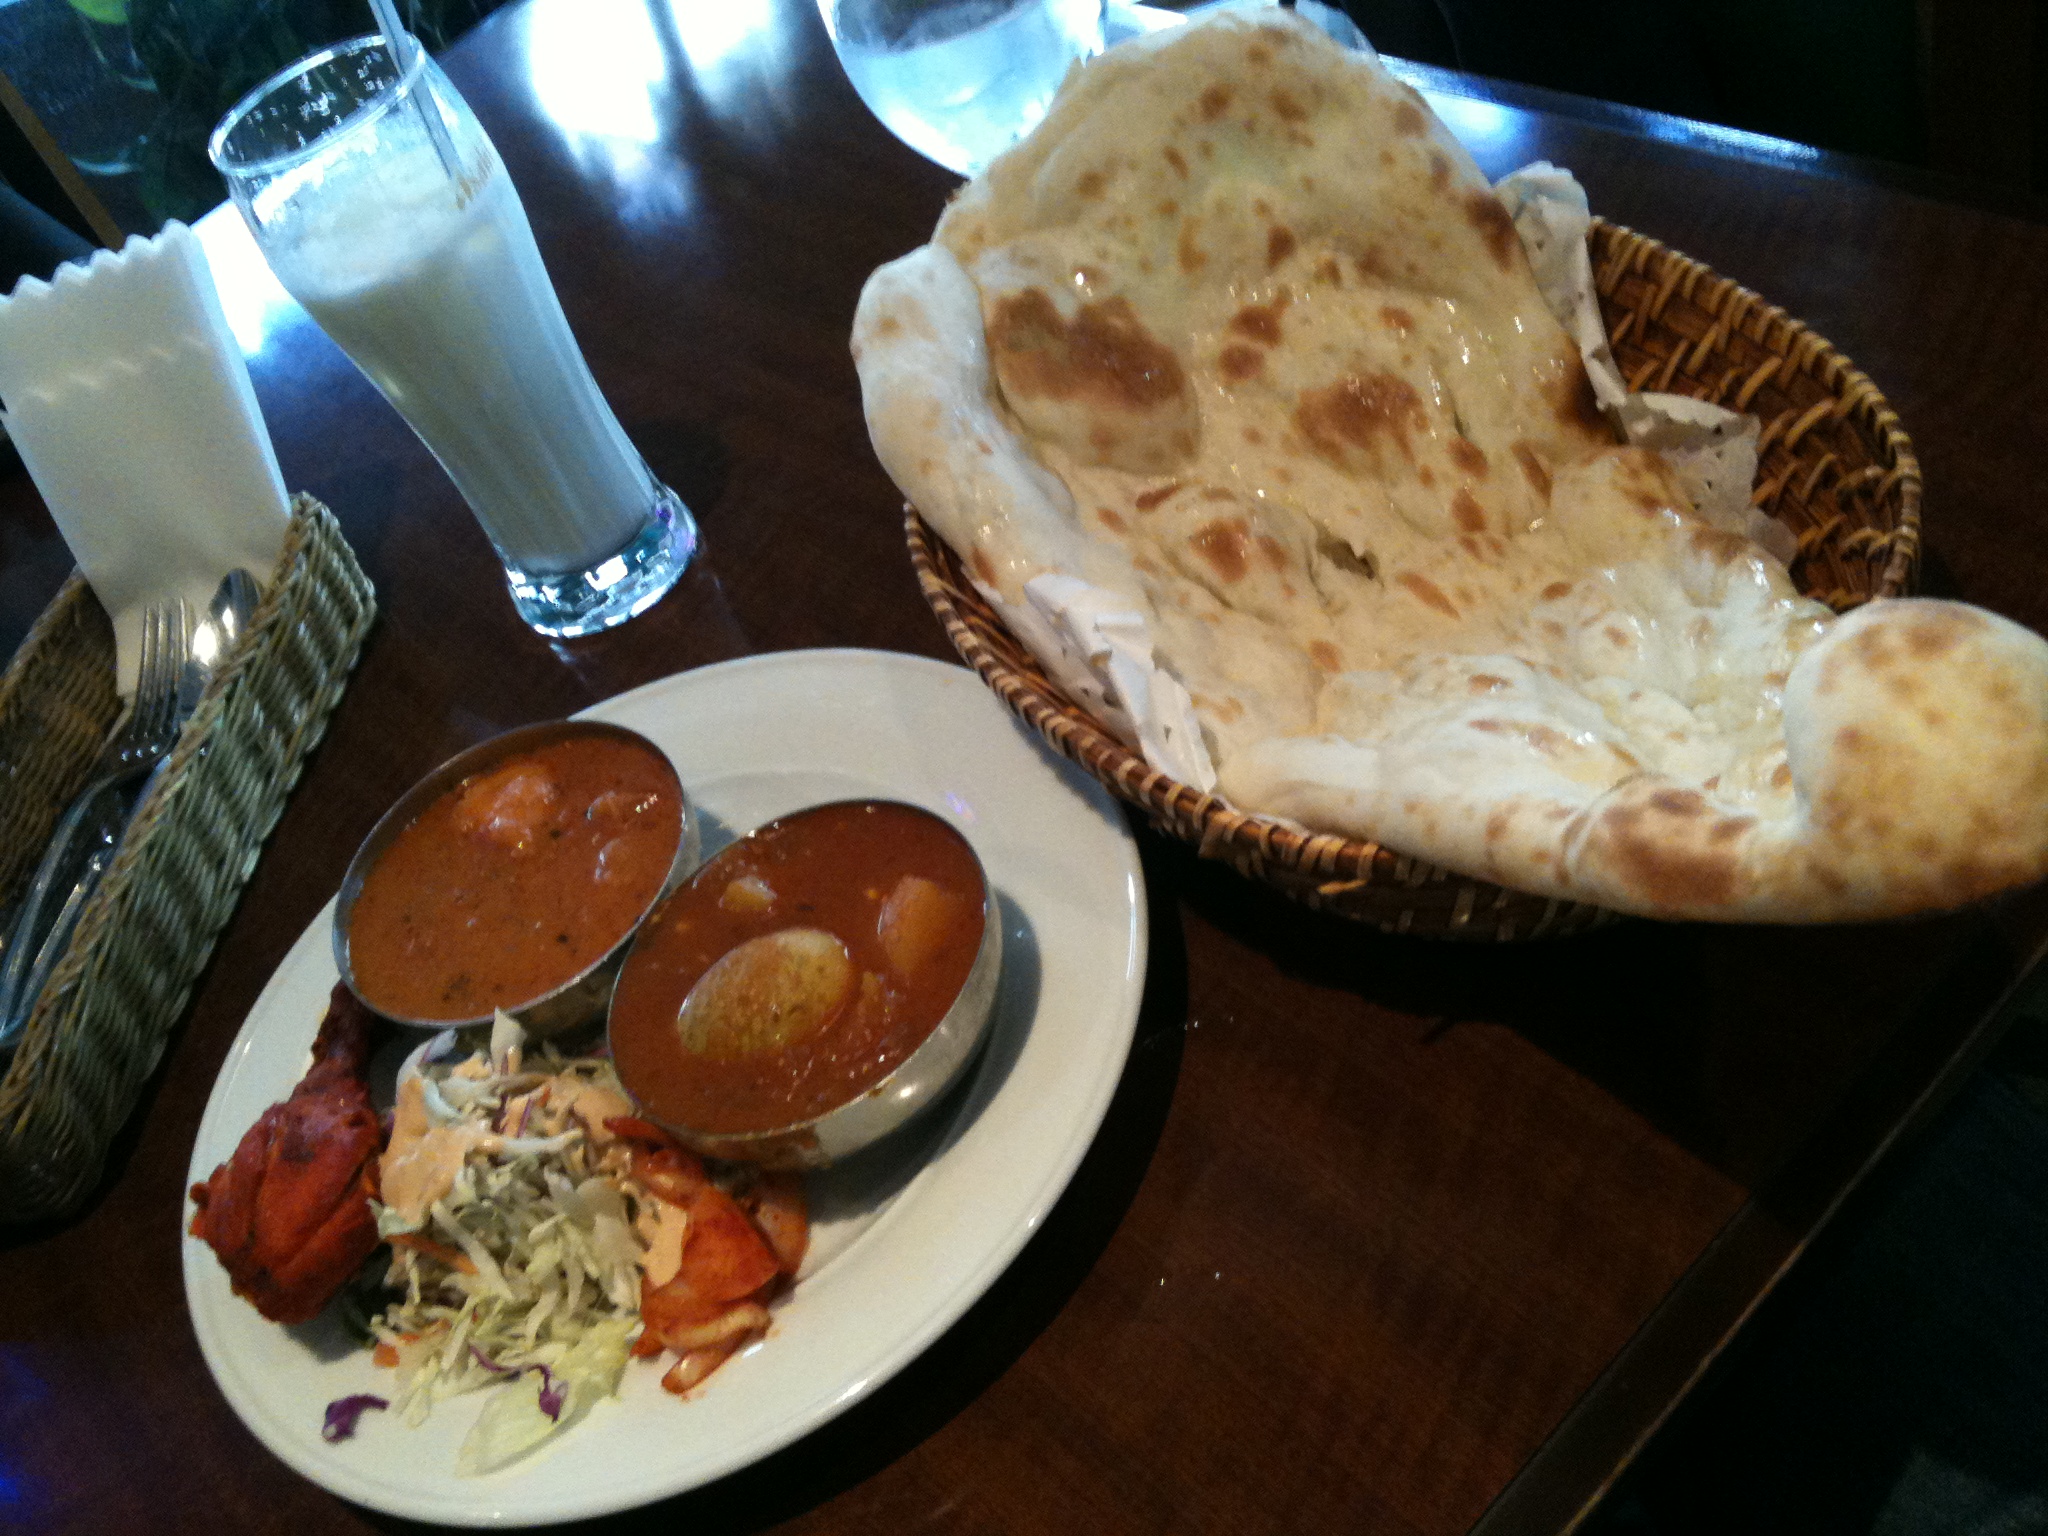 food items, including naan bread, is served on a table